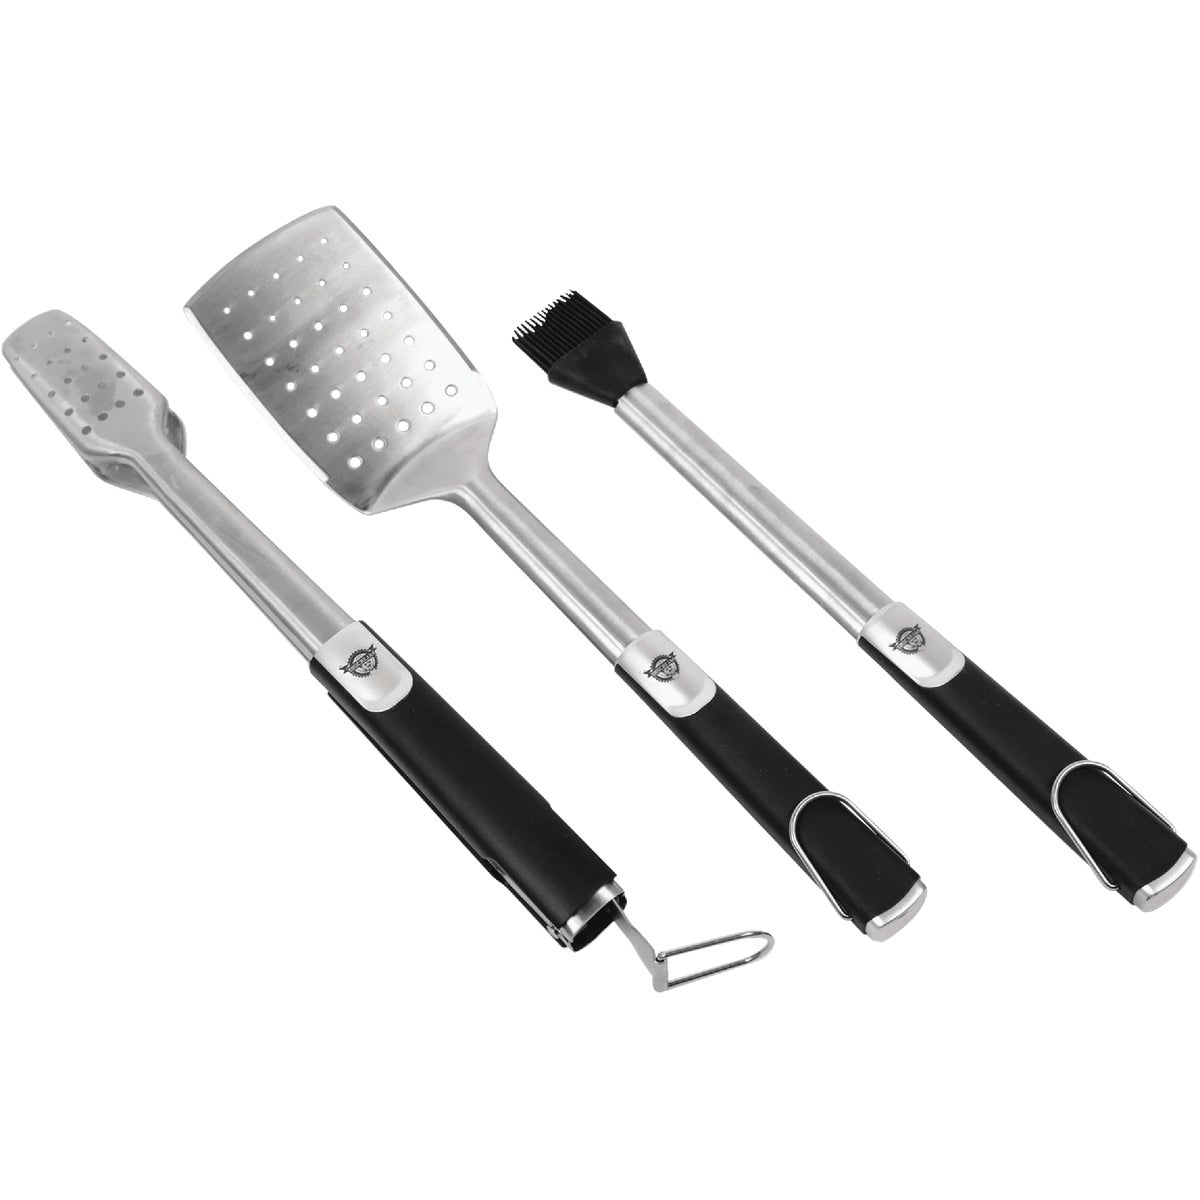 Pit Boss Rubber Handles Stainless Steel Blade 3-Piece BBQ Tool Set